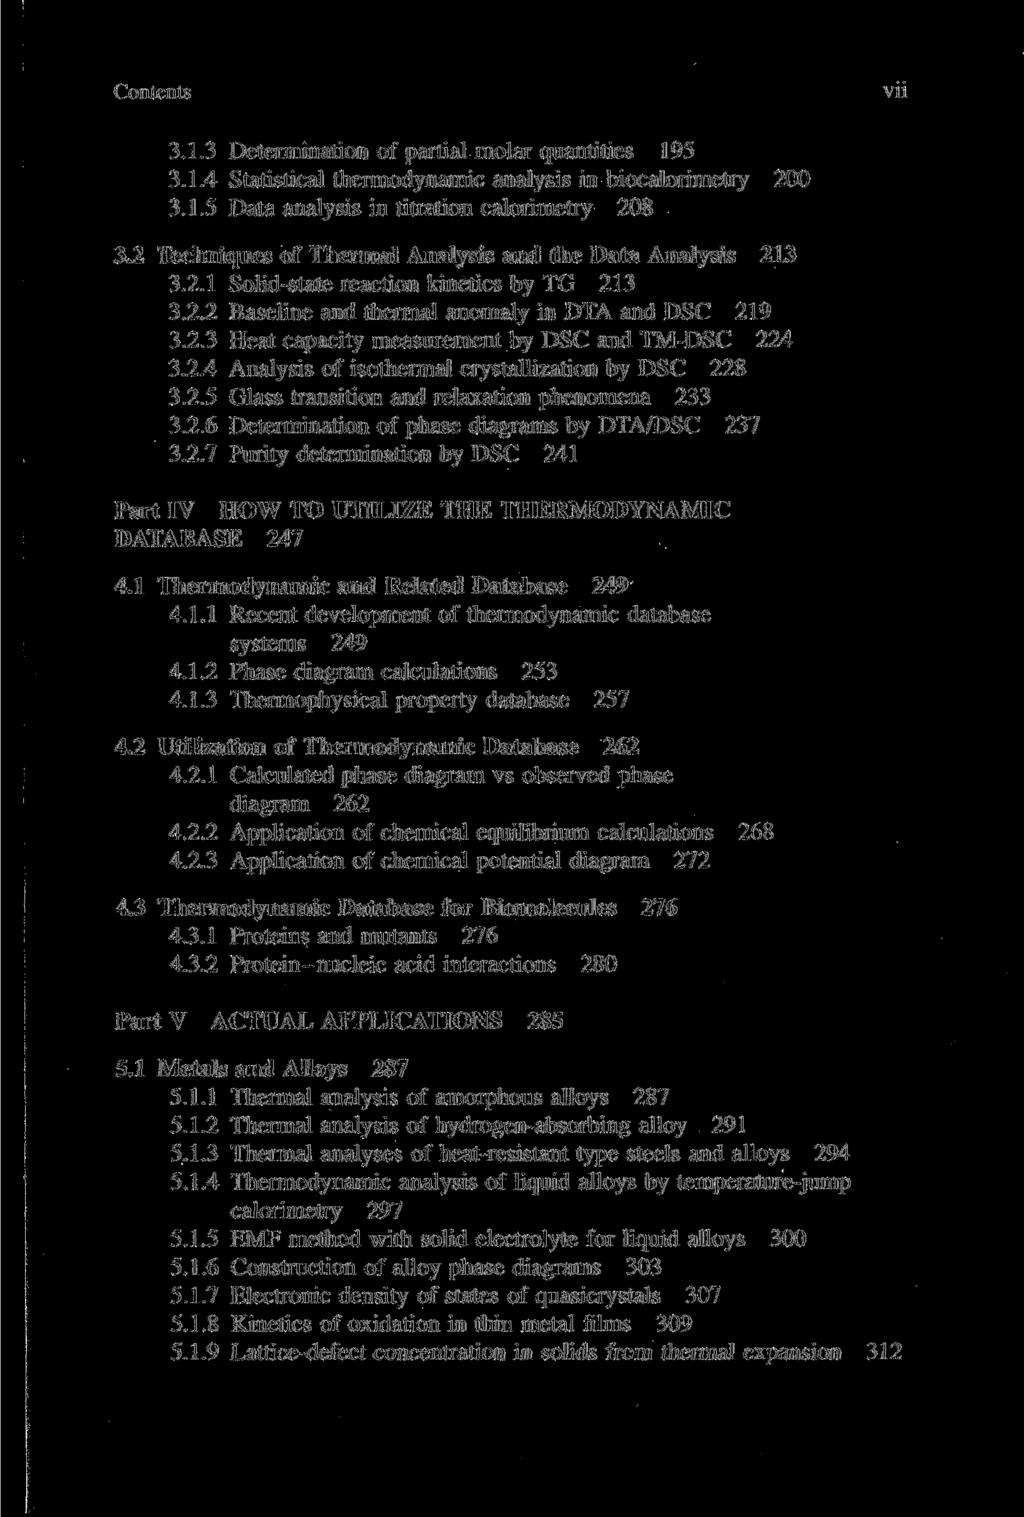 Contents vn 3.1.3 Determination of partial molar quantities 195 3.1.4 Statistical thermodynamic analysis in biocalorimetry 200 3.1.5 Data analysis in titration calorimetry 208 3.